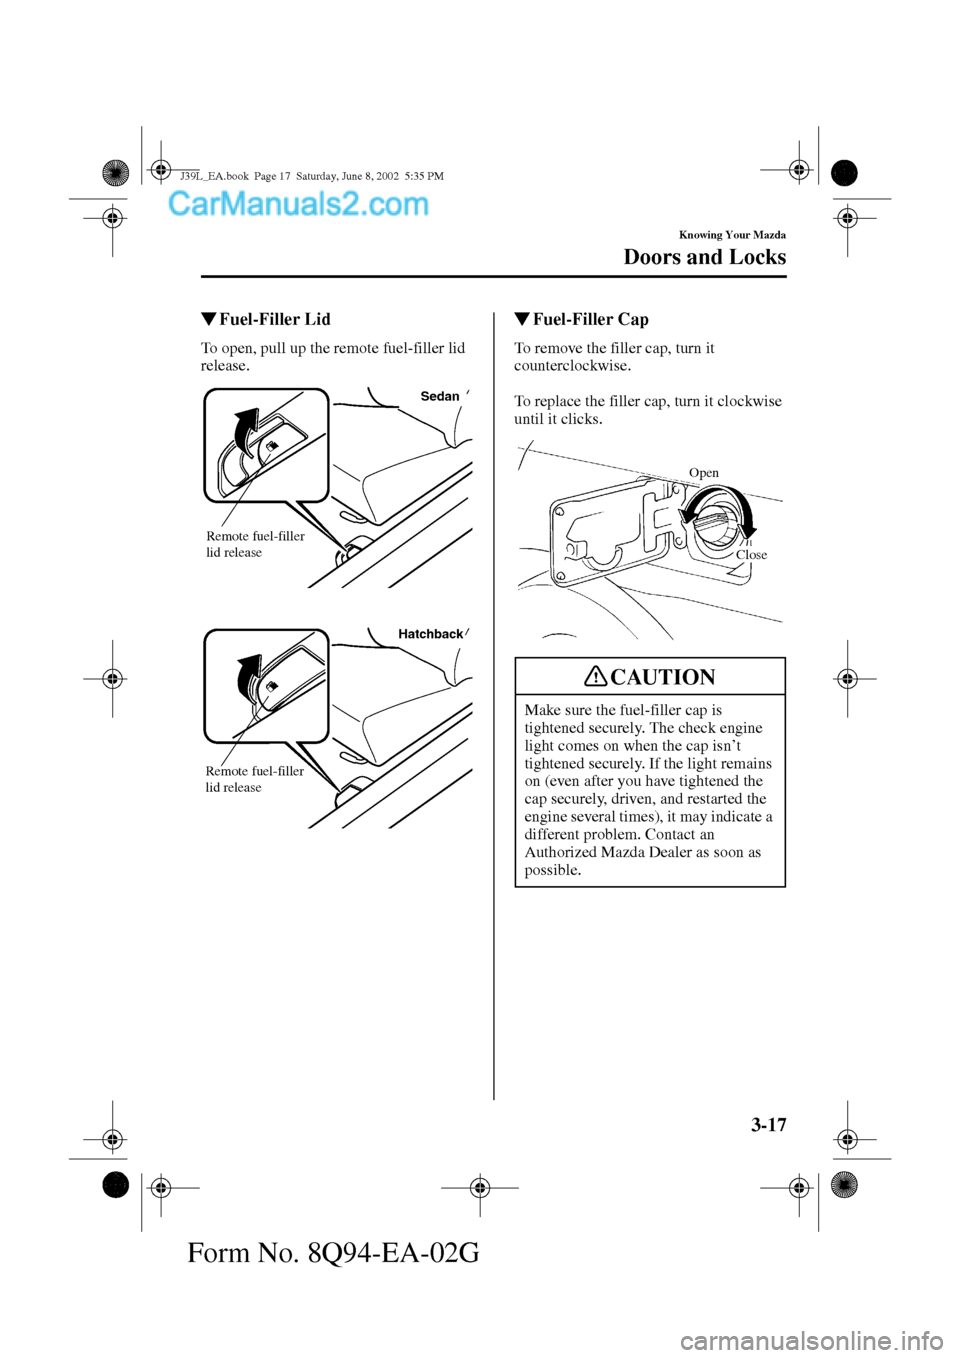 MAZDA MODEL PROTÉGÉ 2003  Owners Manual (in English) 3-17
Knowing Your Mazda
Doors and Locks
Form No. 8Q94-EA-02G
Fuel-Filler Lid
To open, pull up the remote fuel-filler lid 
release.
Fuel-Filler Cap
To remove the filler cap, turn it 
counterclockwise